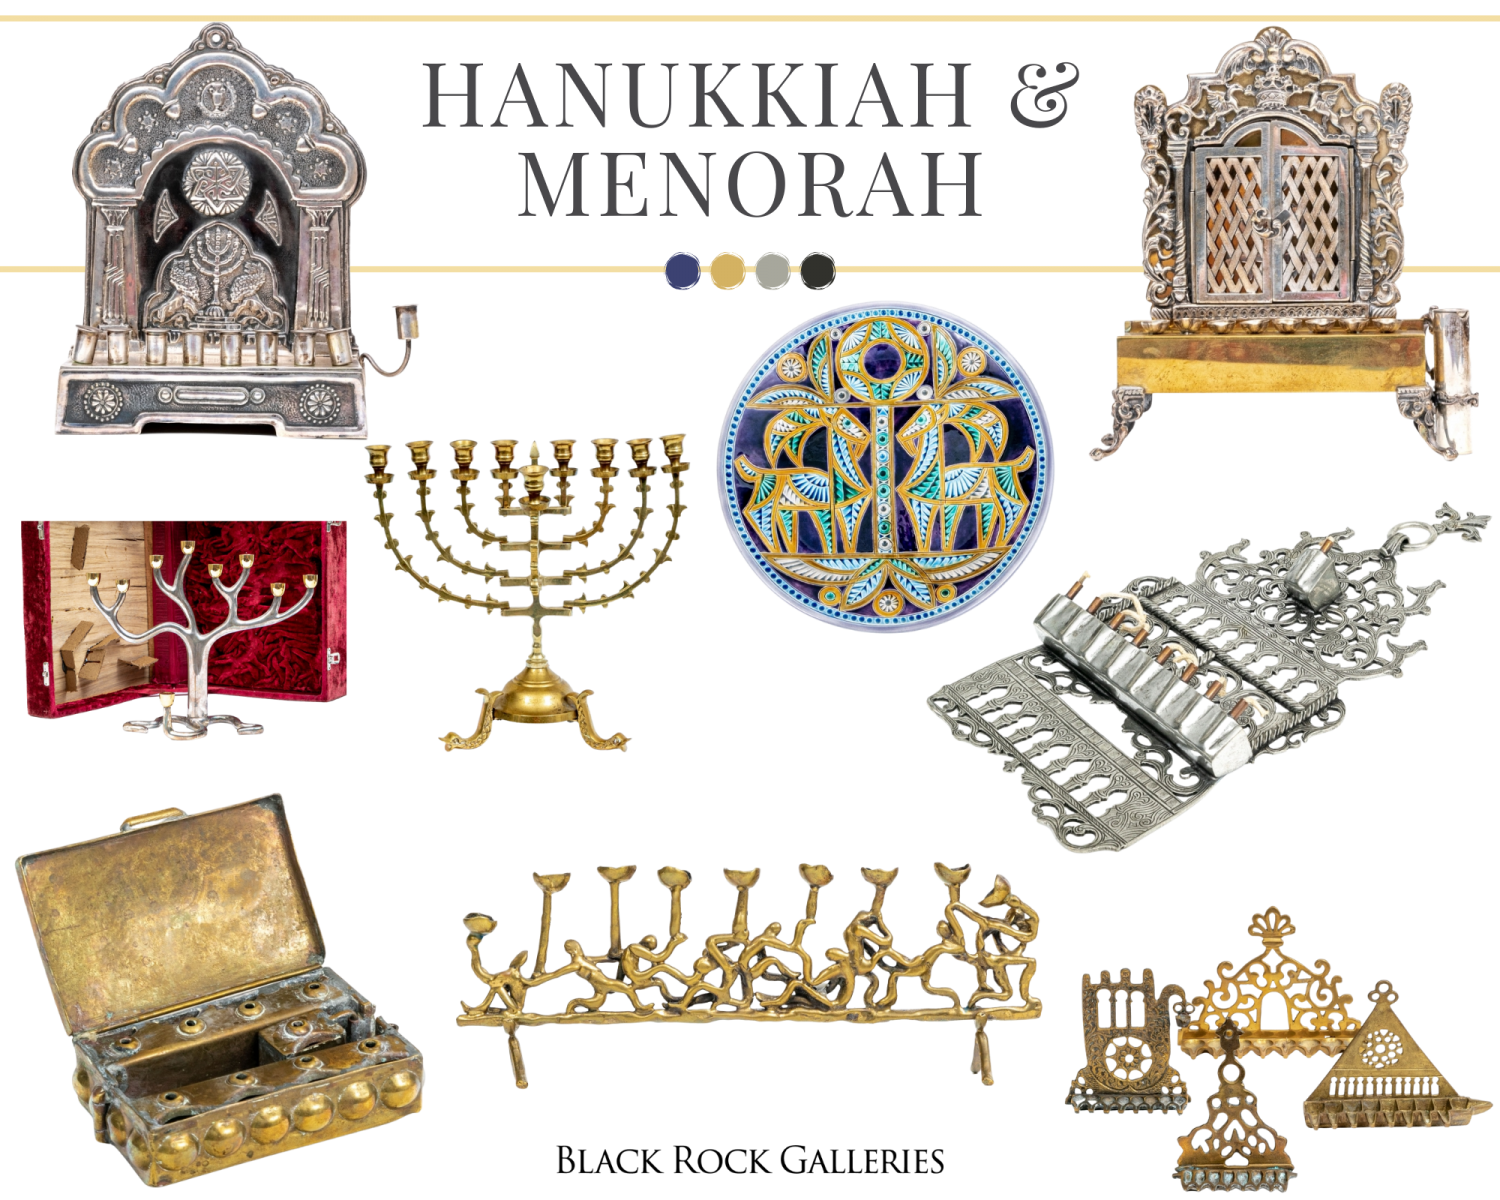 Hanukiah menorahs of brass, gold, silver and other media makes for a unique collection.